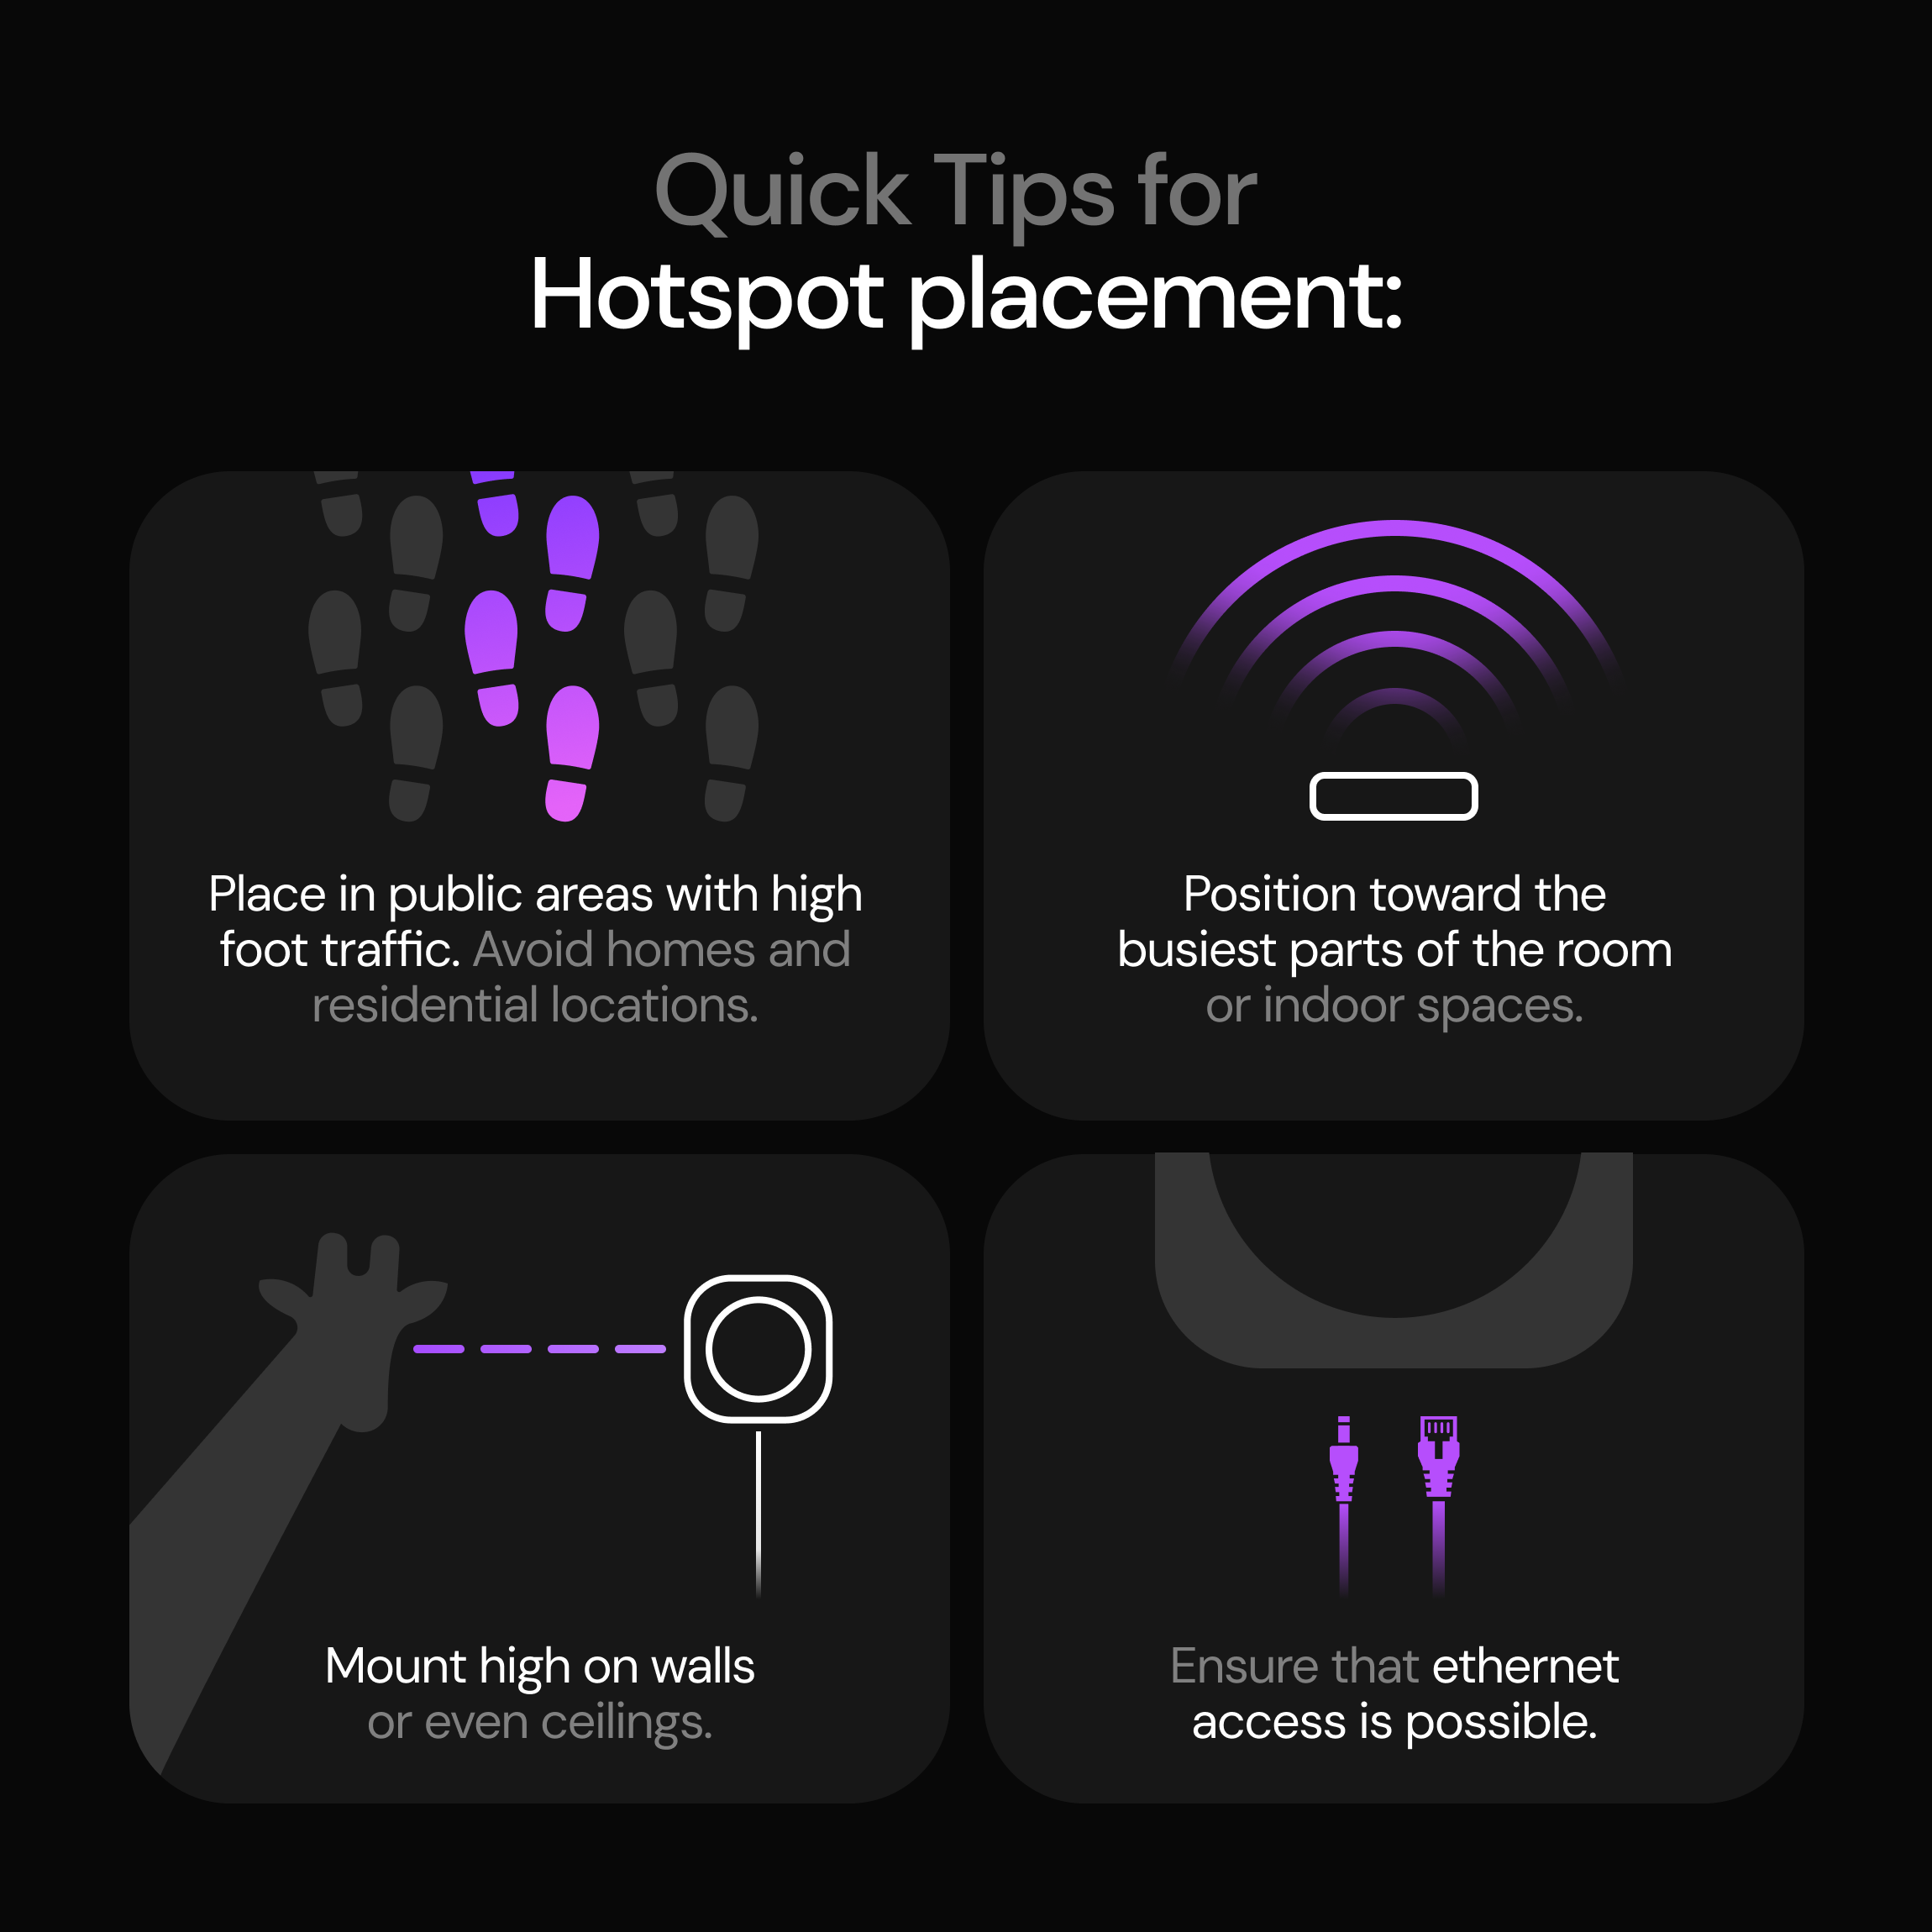 Deploy in Boosted Locations. Strengthen the Network. Earn Extra Rewards.